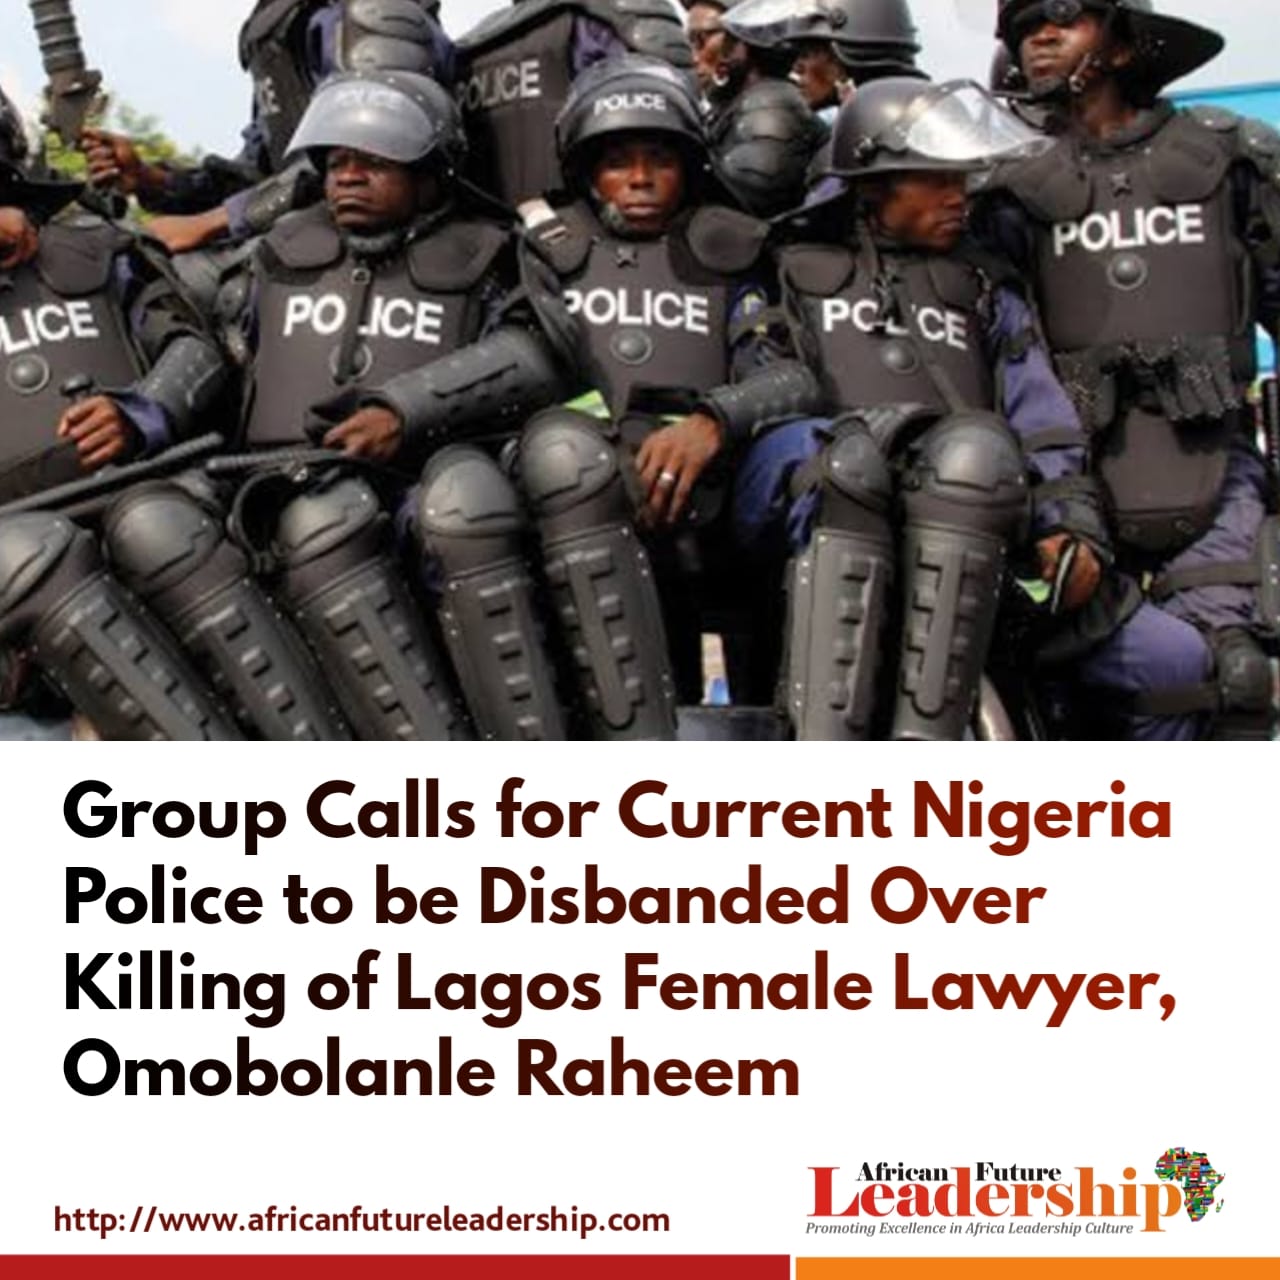 Group Calls for Current Nigeria Police to be Disbanded Over Killing of Lagos Female Lawyer, Omobolanle Raheem